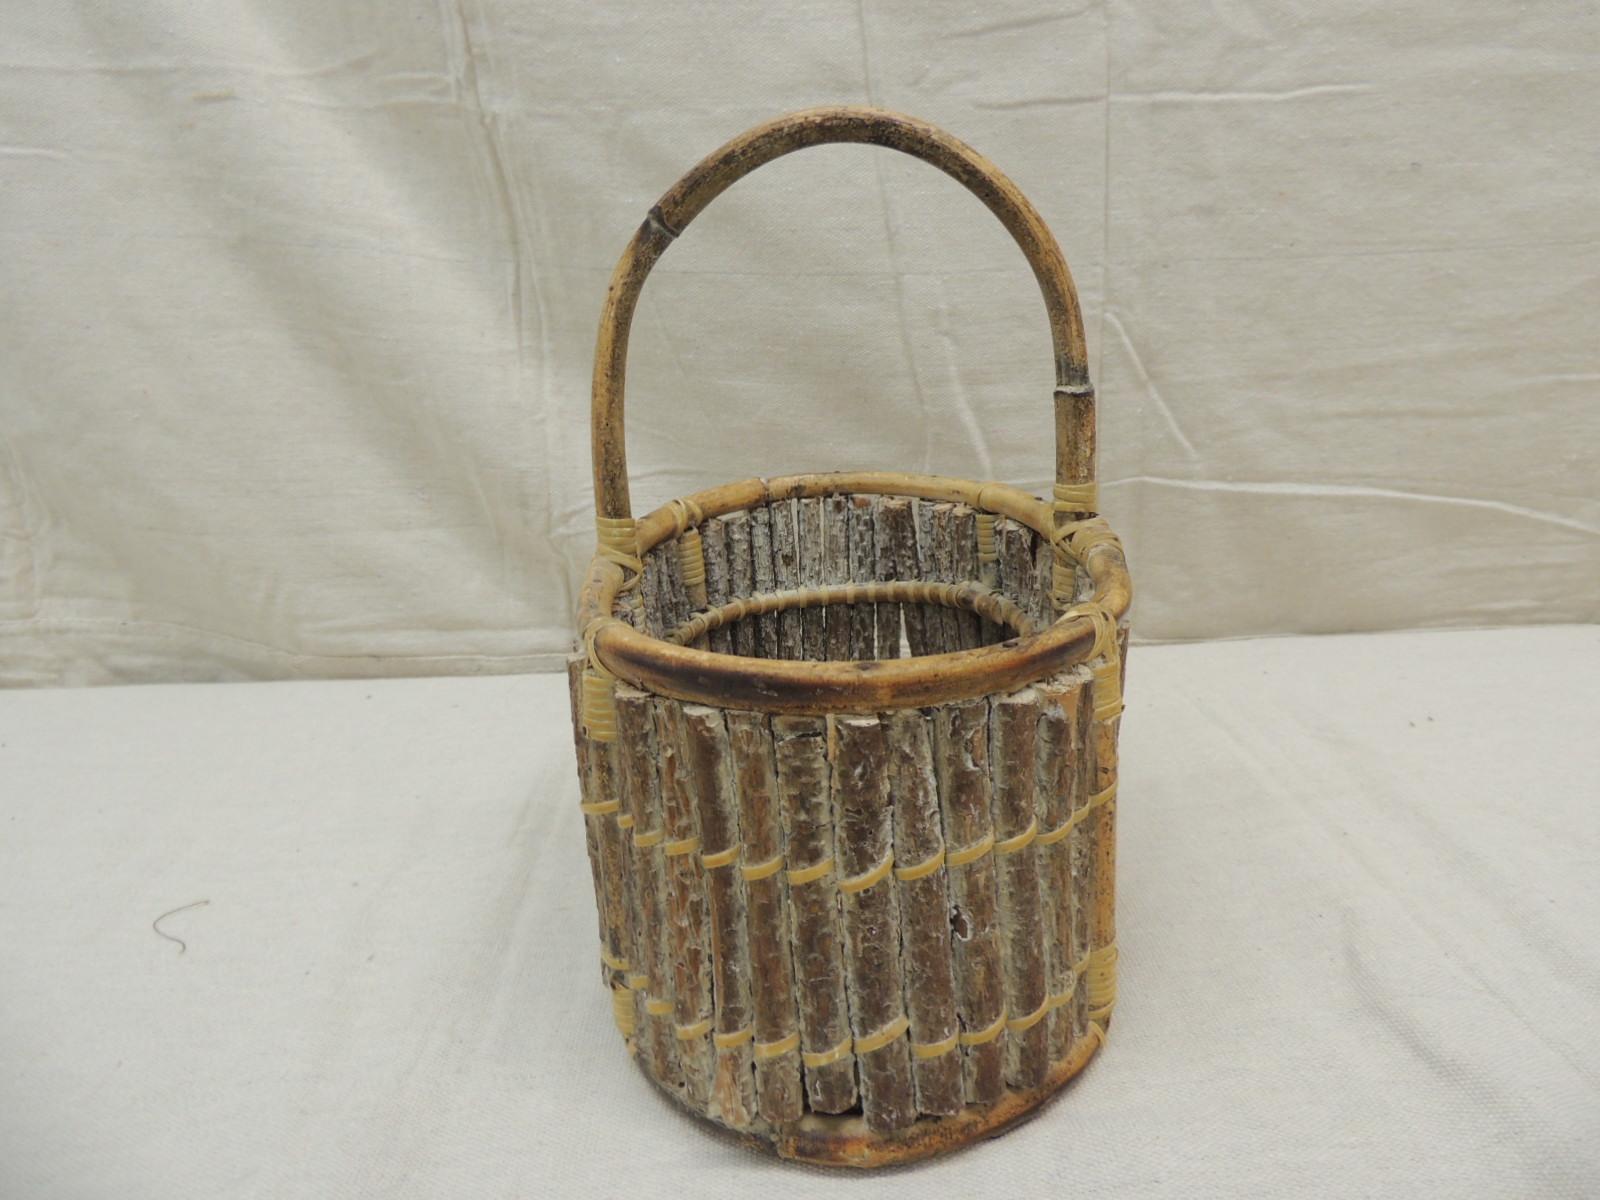 Willow oval decorative basket with handle.
Size: 7